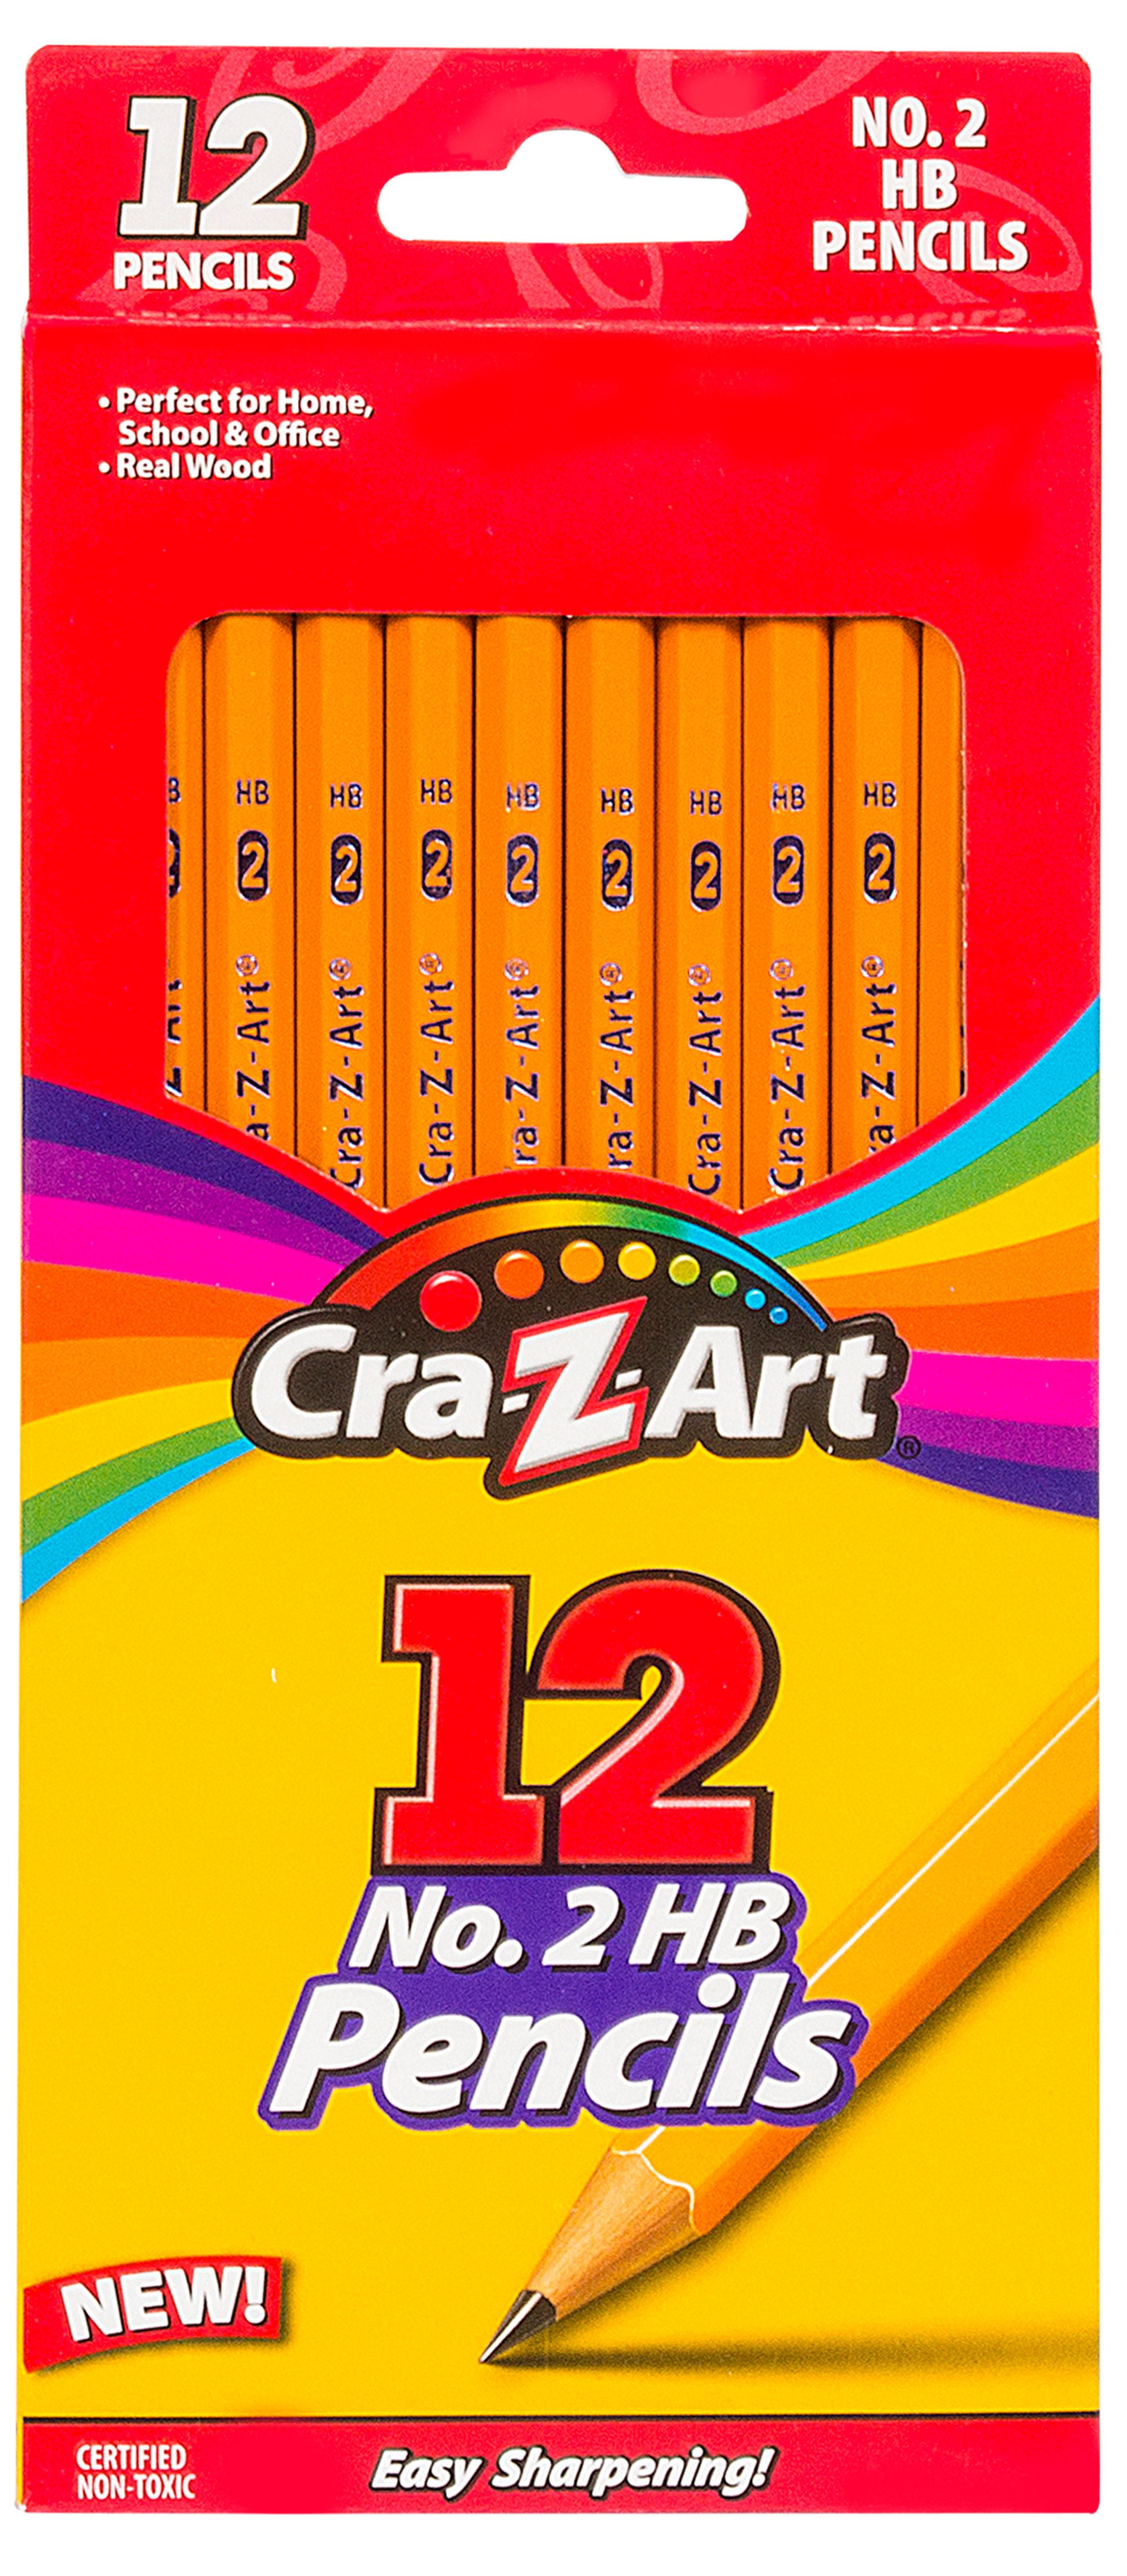 Crayola Colored Pencils, School Supplies, With Colors of the World,  Beginner Child, 100 Pcs 